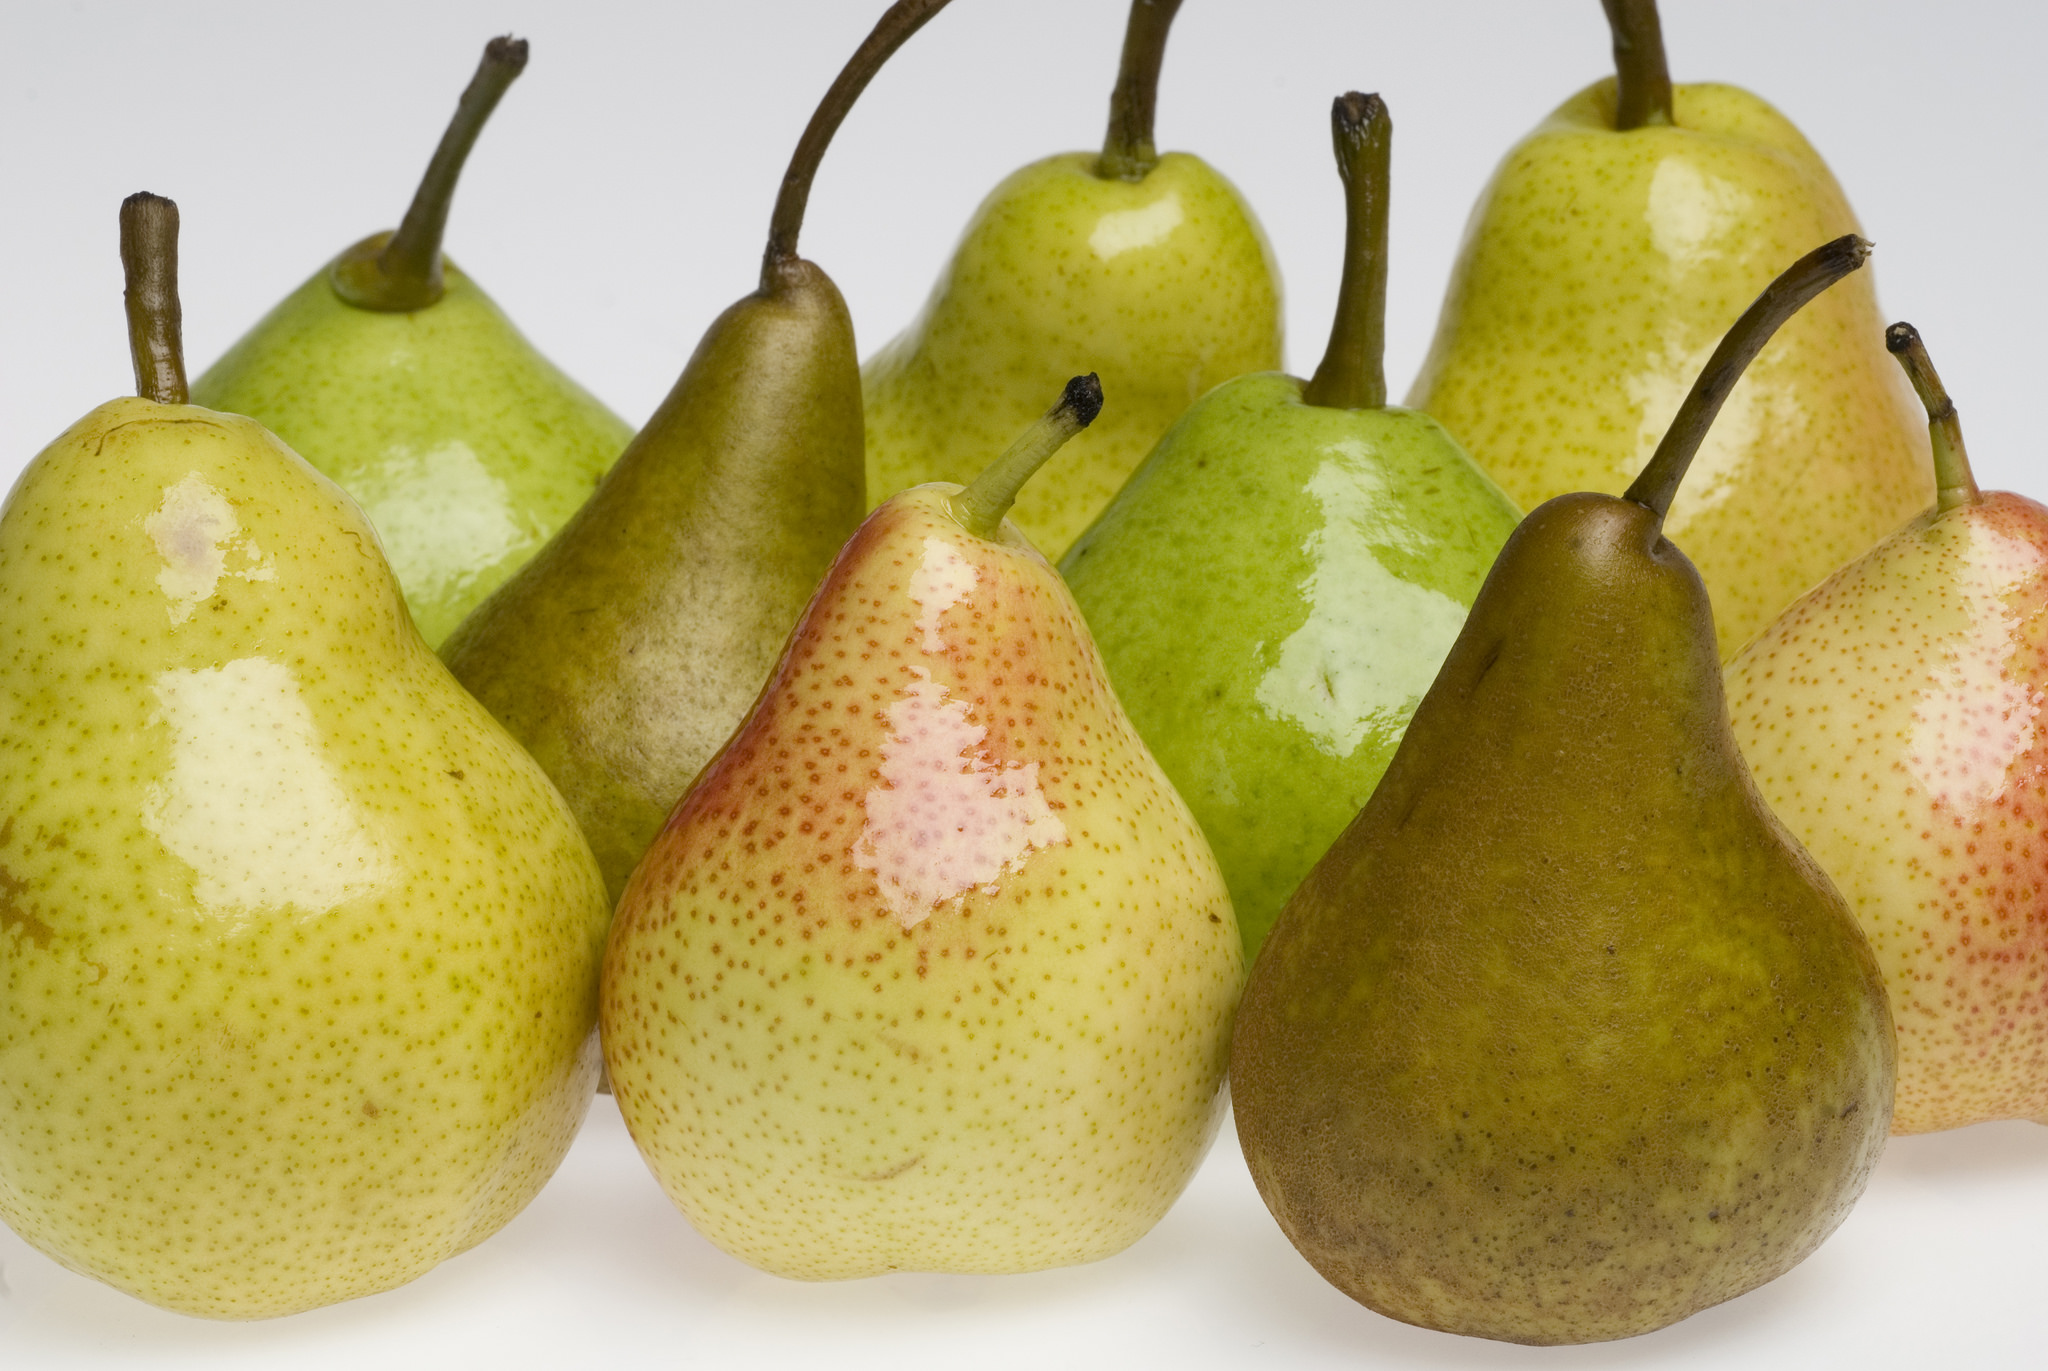 Pear-occa, anyone? CSIRO reviews pears' potential as a hangover cure ...